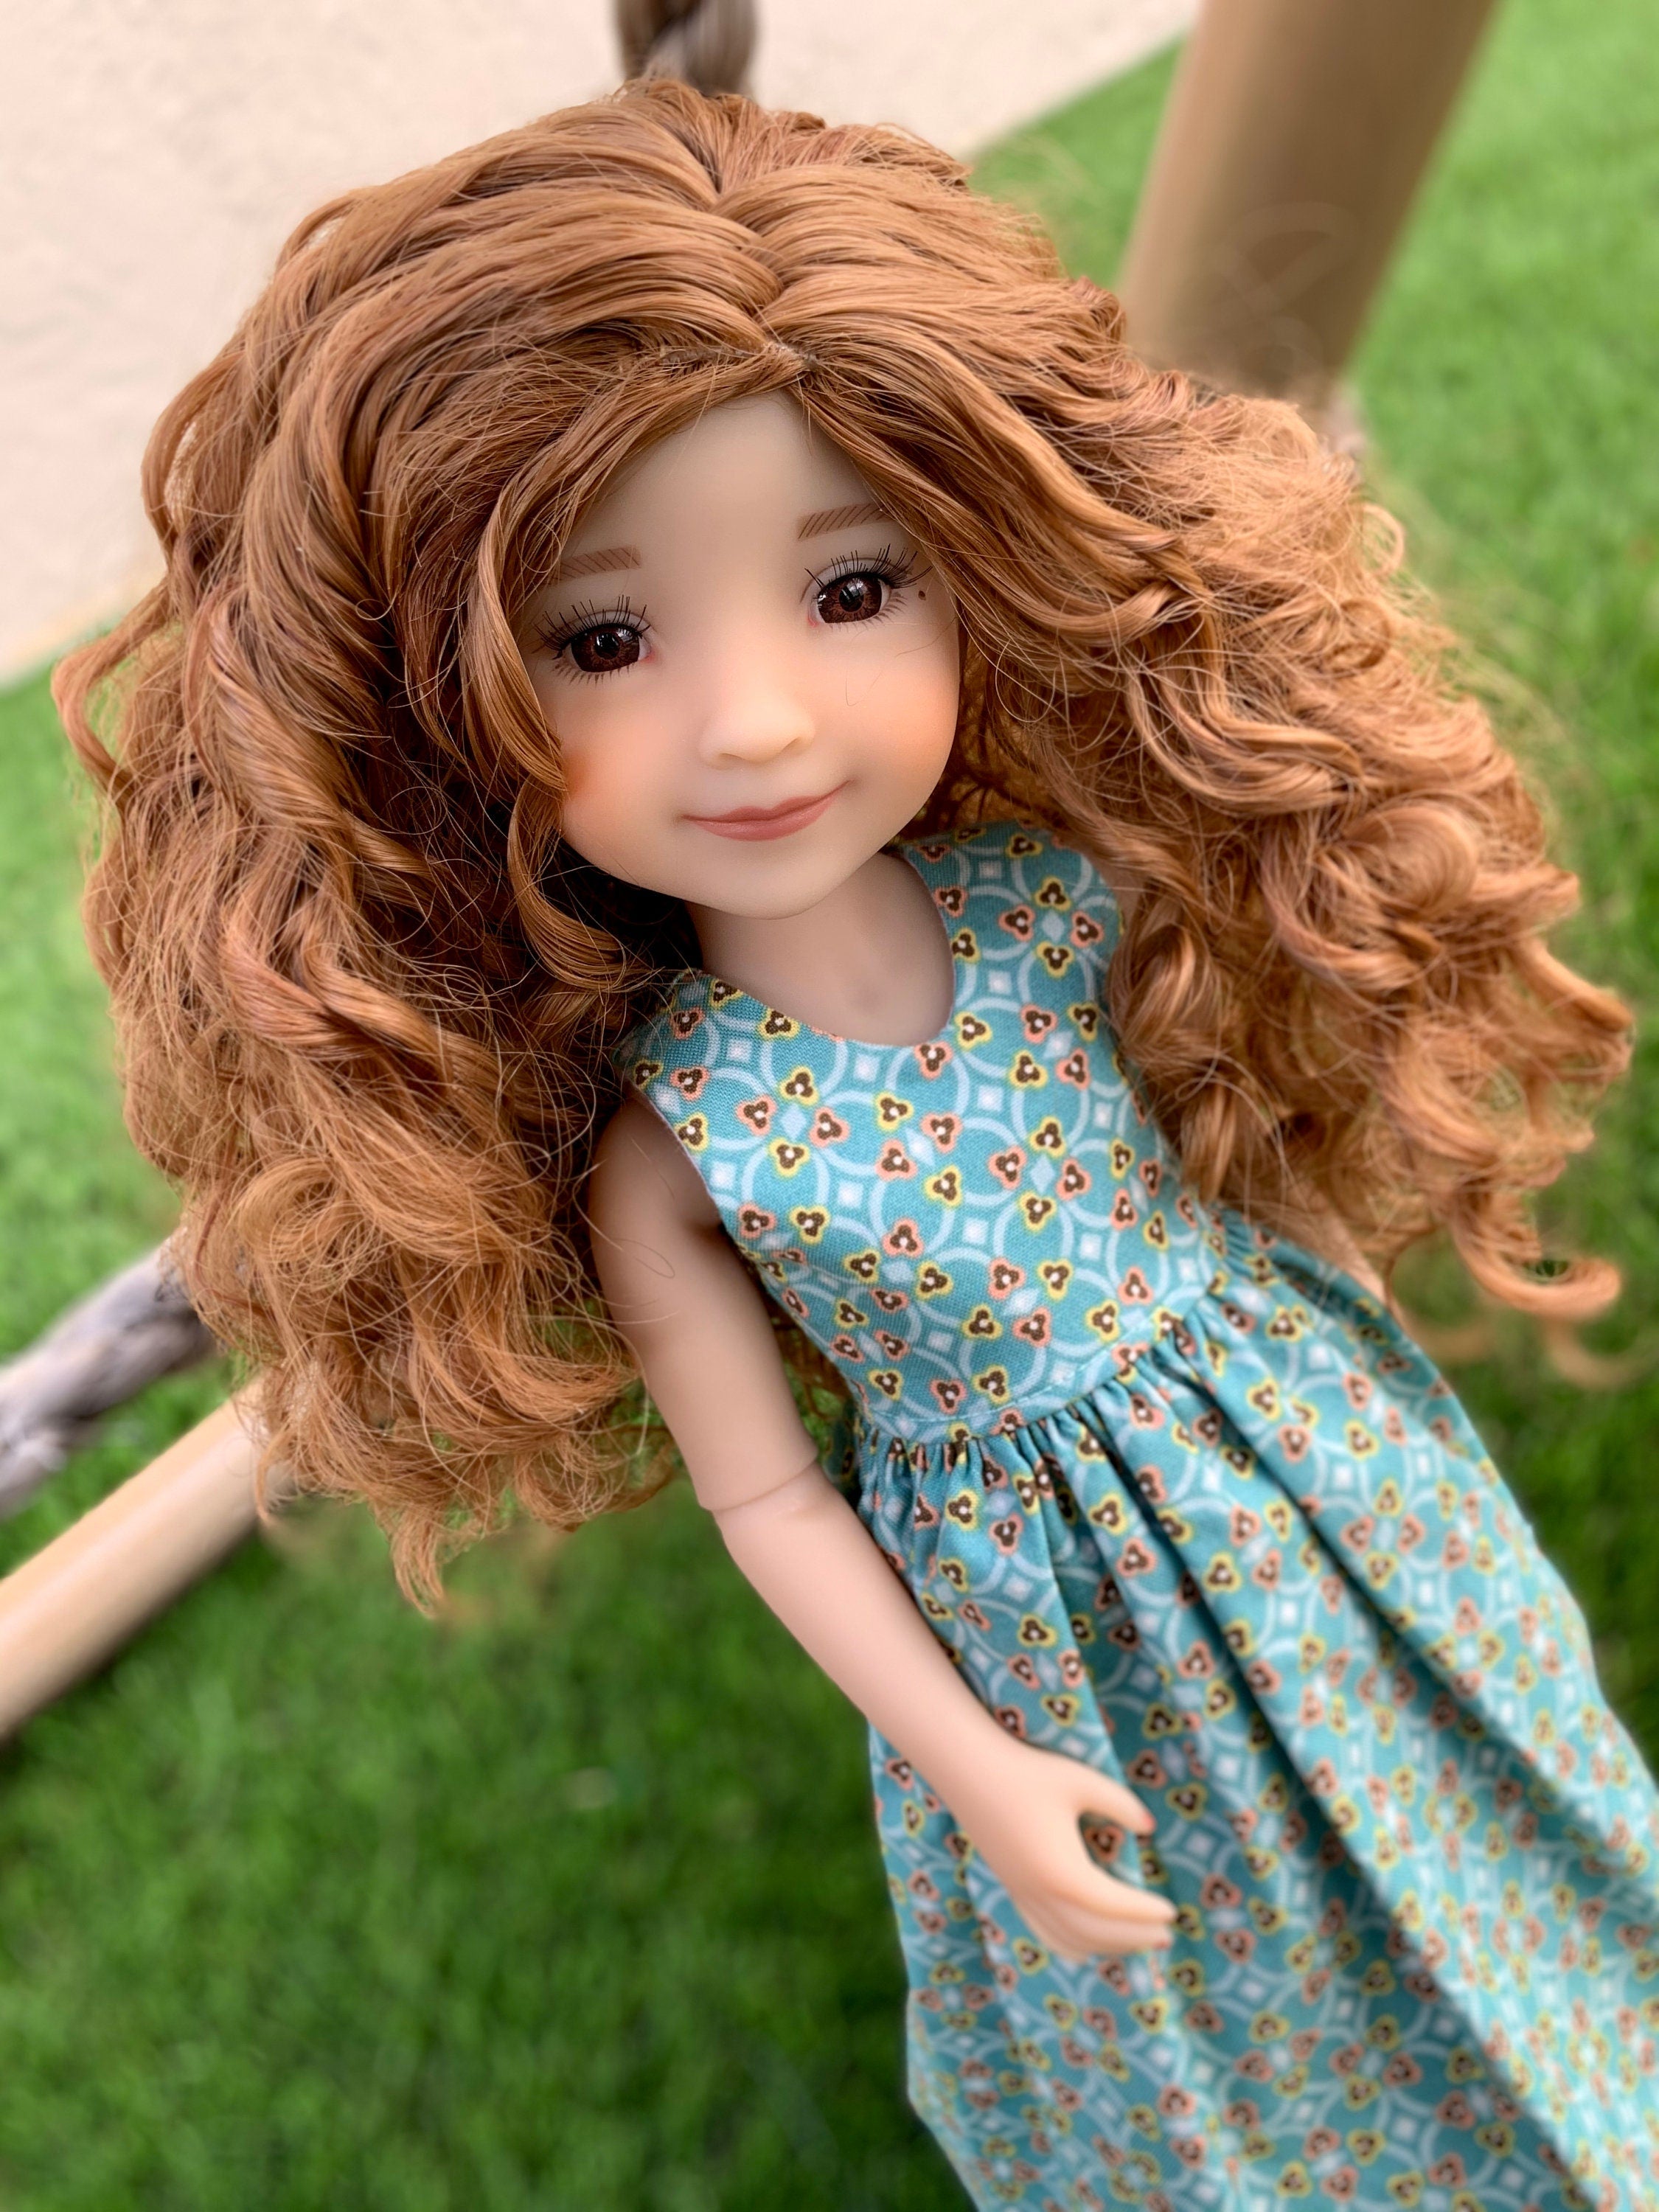 Custom  doll Wig for 14"  AG Dolls - Heat Safe-Tangle Resistant-fits 8-9" head size Kaye Wiggs  RRFF girls of the orient SNUG fit